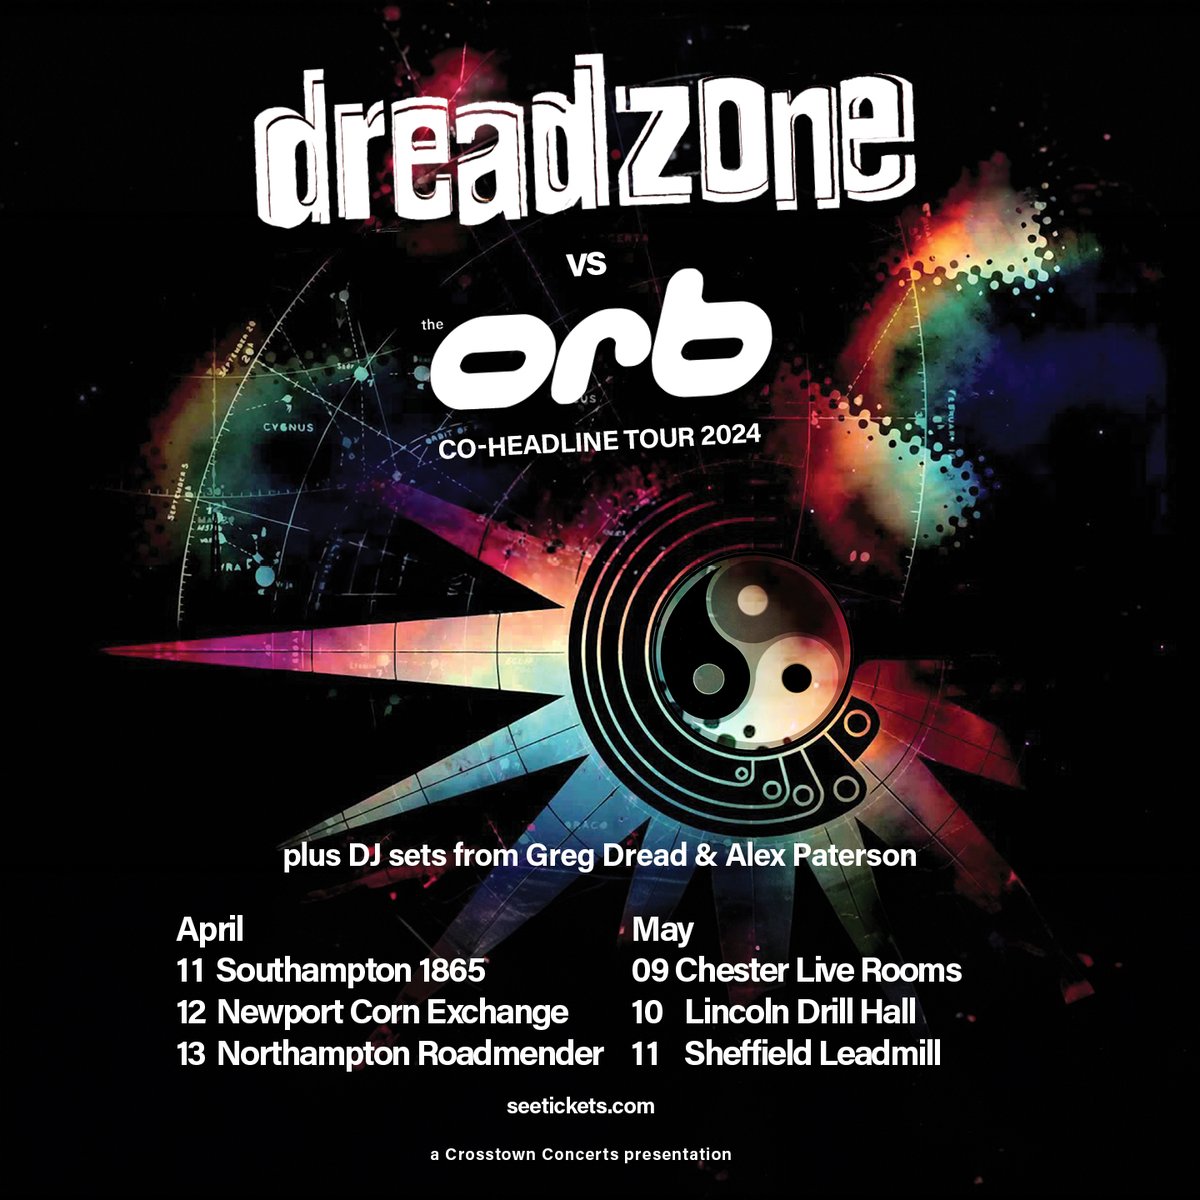 After a break we are back together for some rehearsals at Dread Central ahead of our shows with the @Orbinfo this week